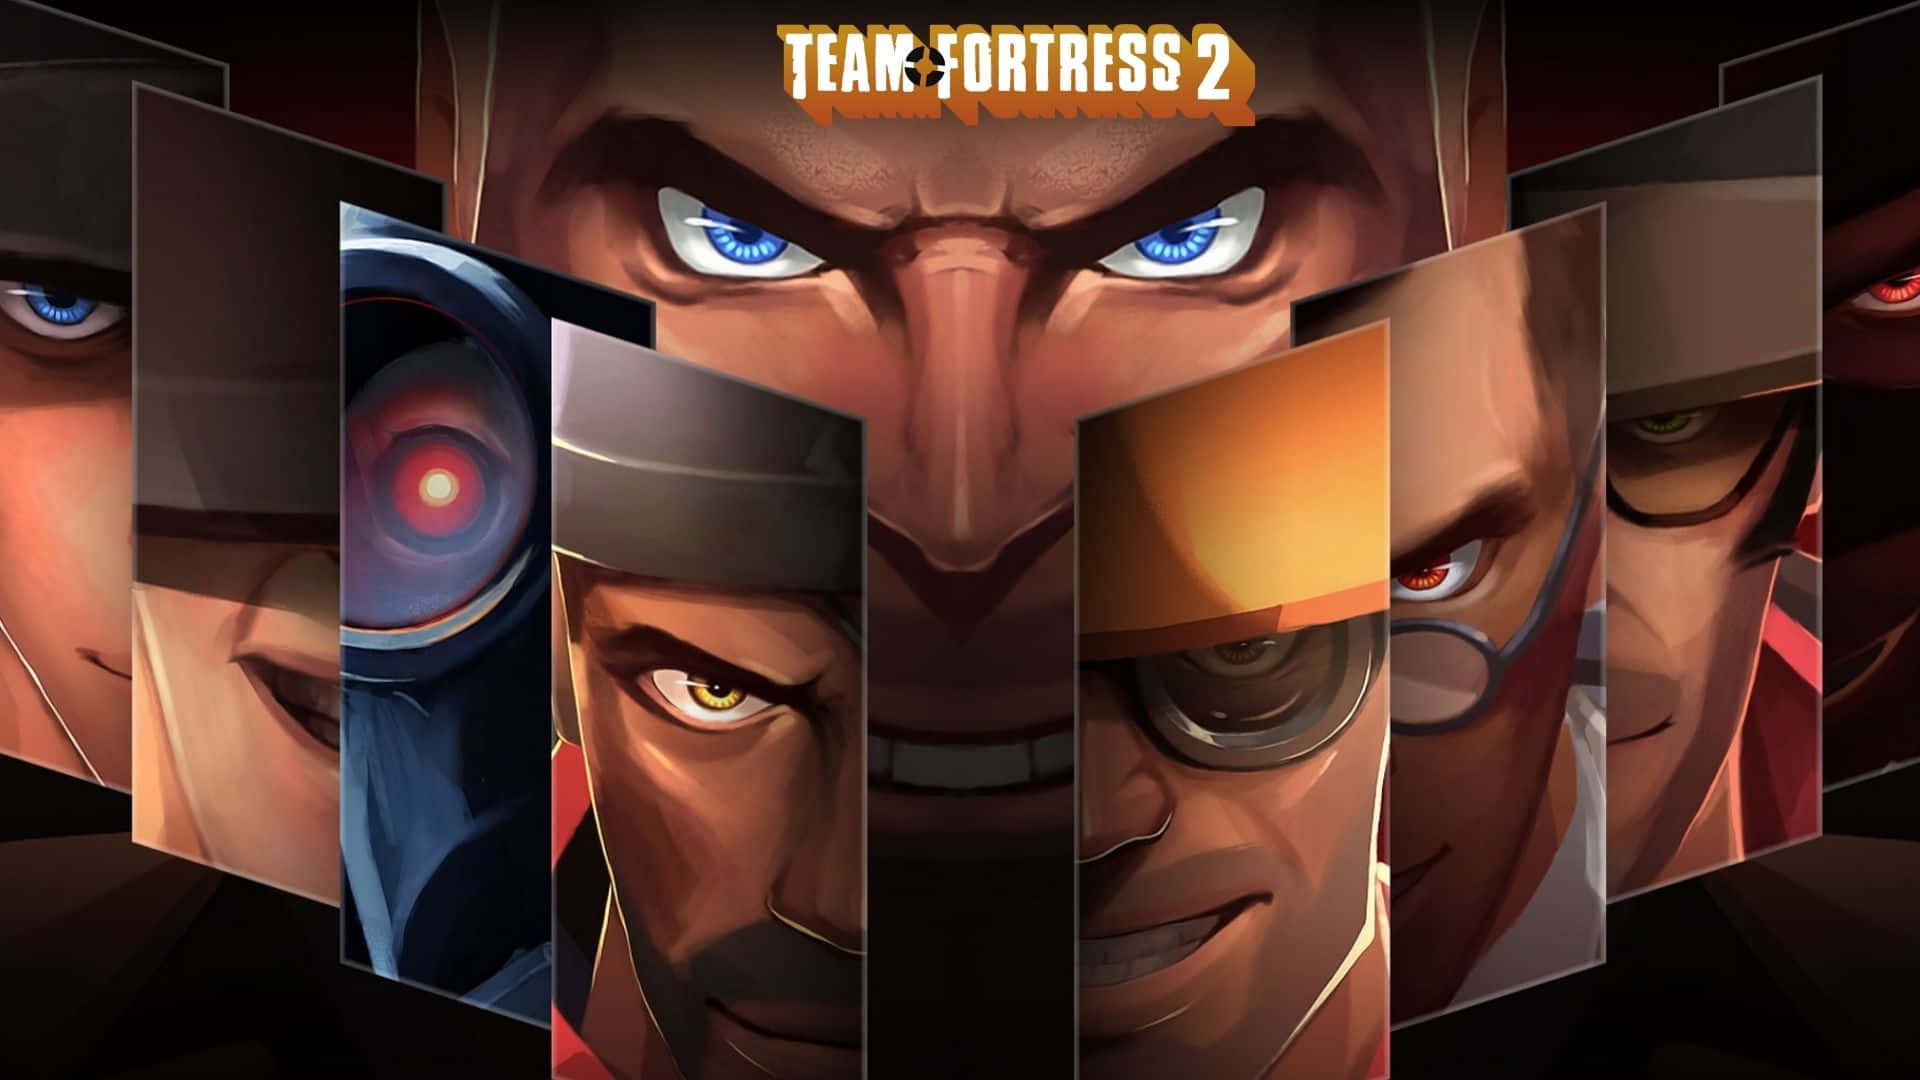 An Exciting Match of TF2